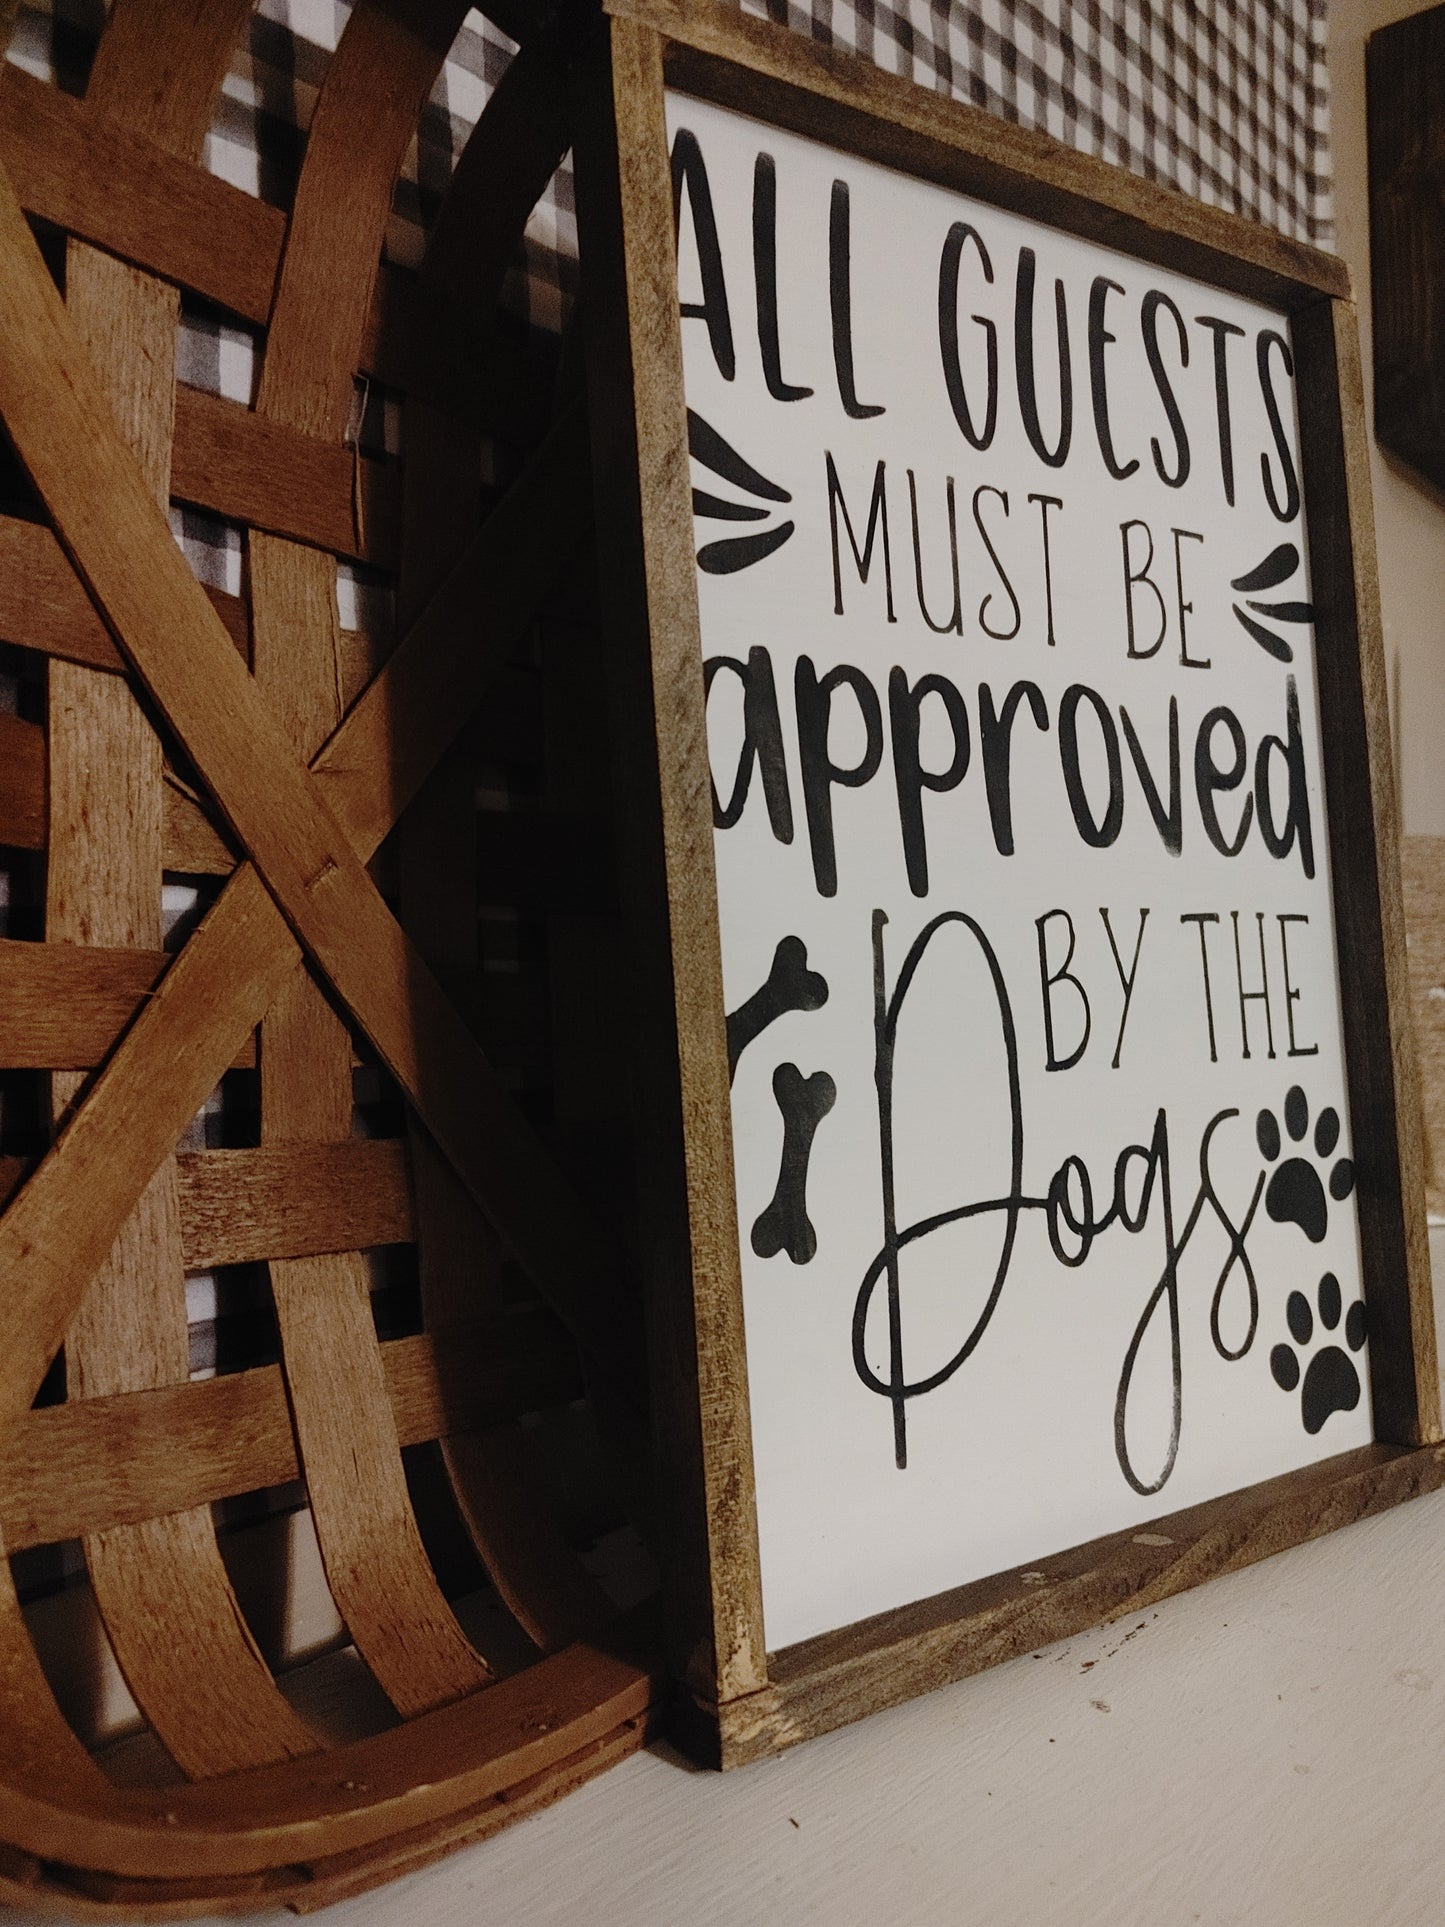 All guests must be approved by the dogs Sign